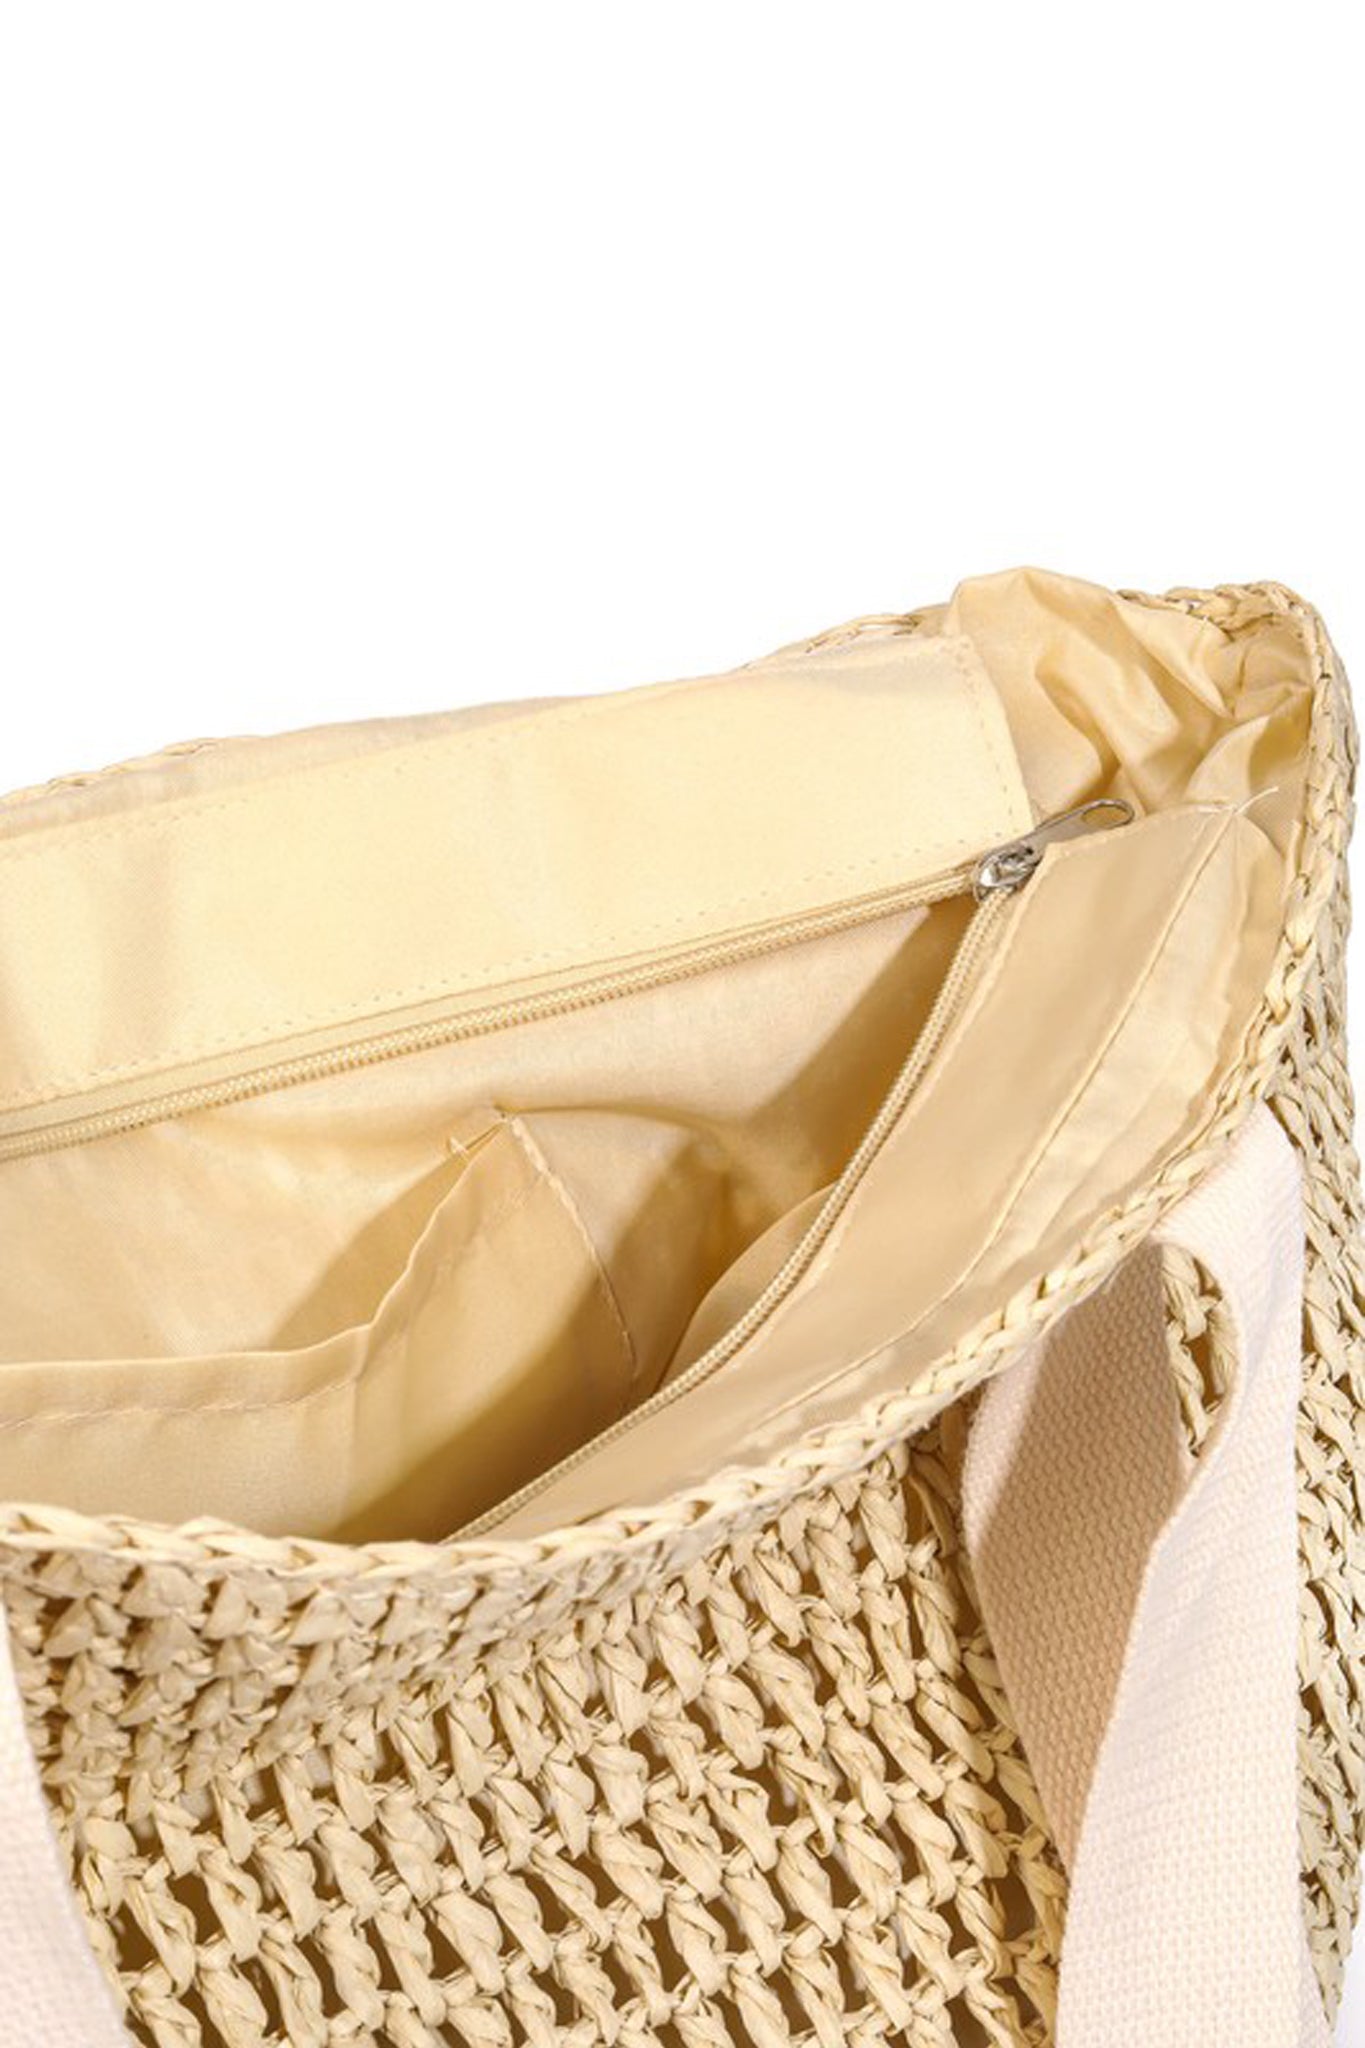 View 4 of Ironwood Bag in Beige, a Bags from Larrea Cove. Detail: .